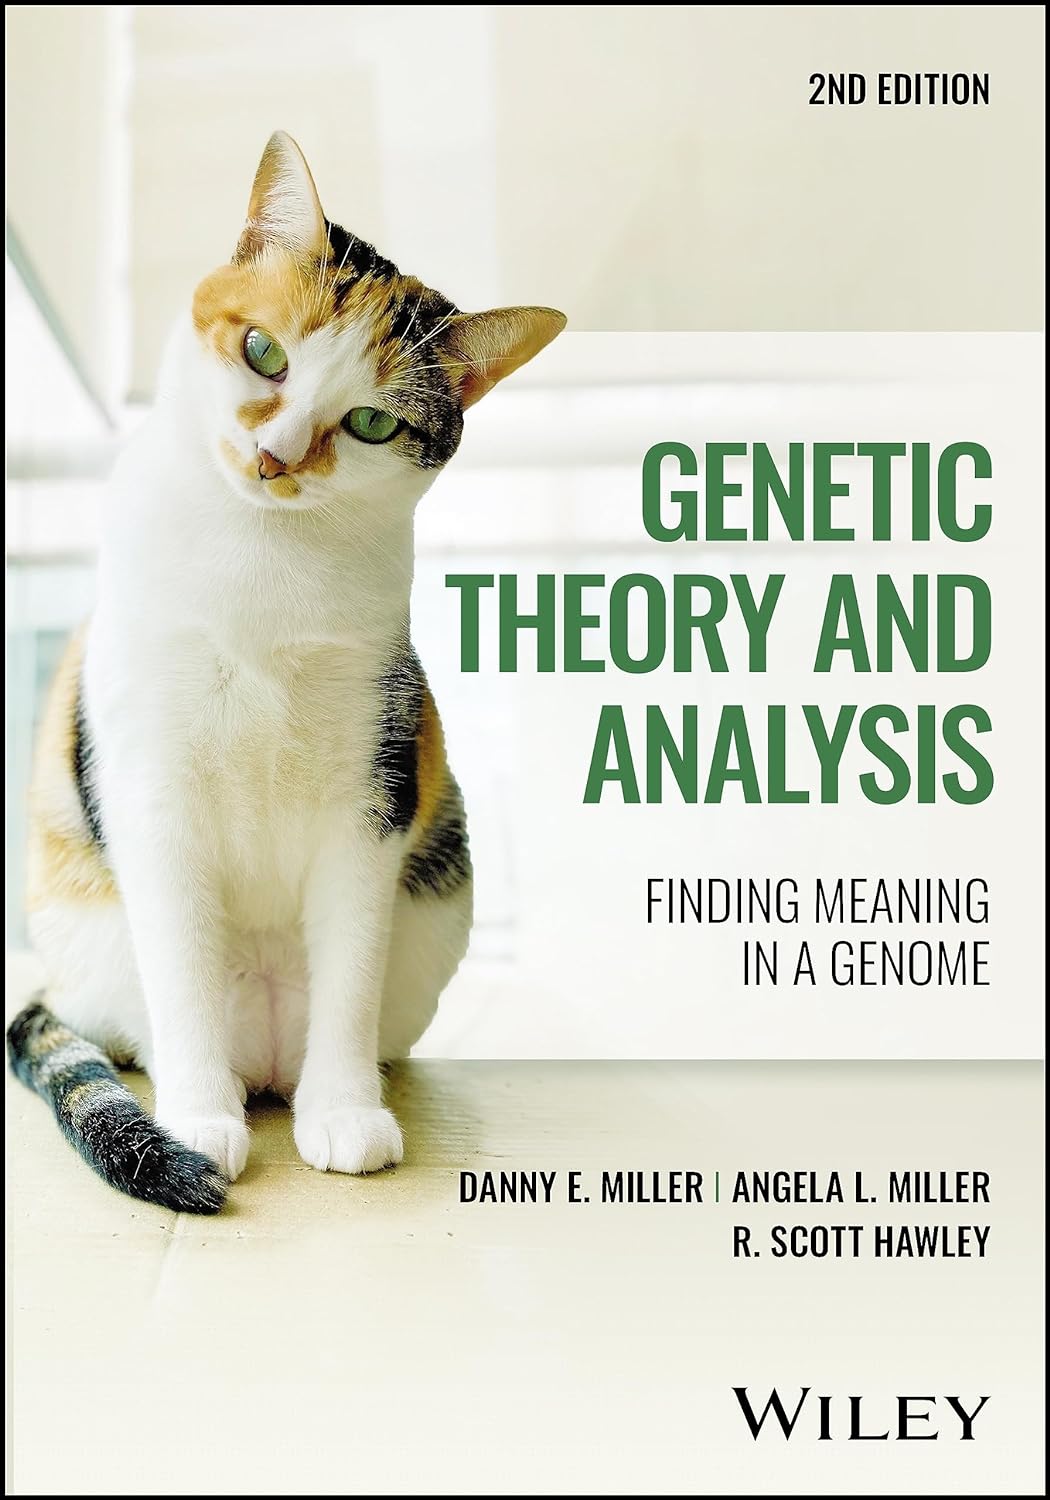 Genetic theory and analysis finding meaning in a genome